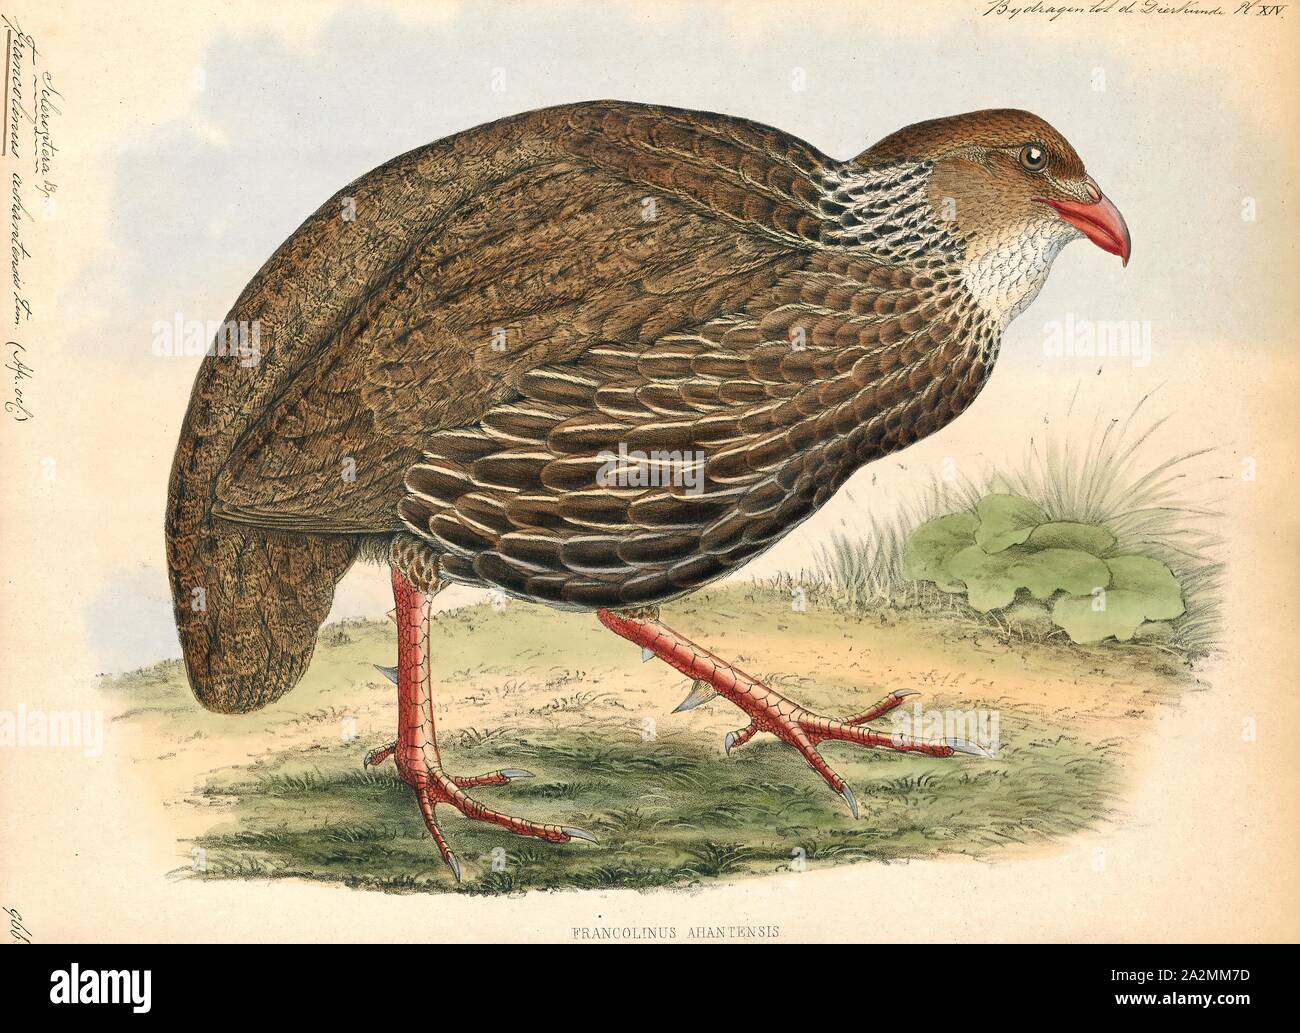 Francolinus ashantensis, Print, Francolinus is a genus of birds in the francolin group of the partridge subfamily of the pheasant family. Its five species range from western Asia and central Asia through to southern Asia and south-eastern Asia., 1848 Stock Photo